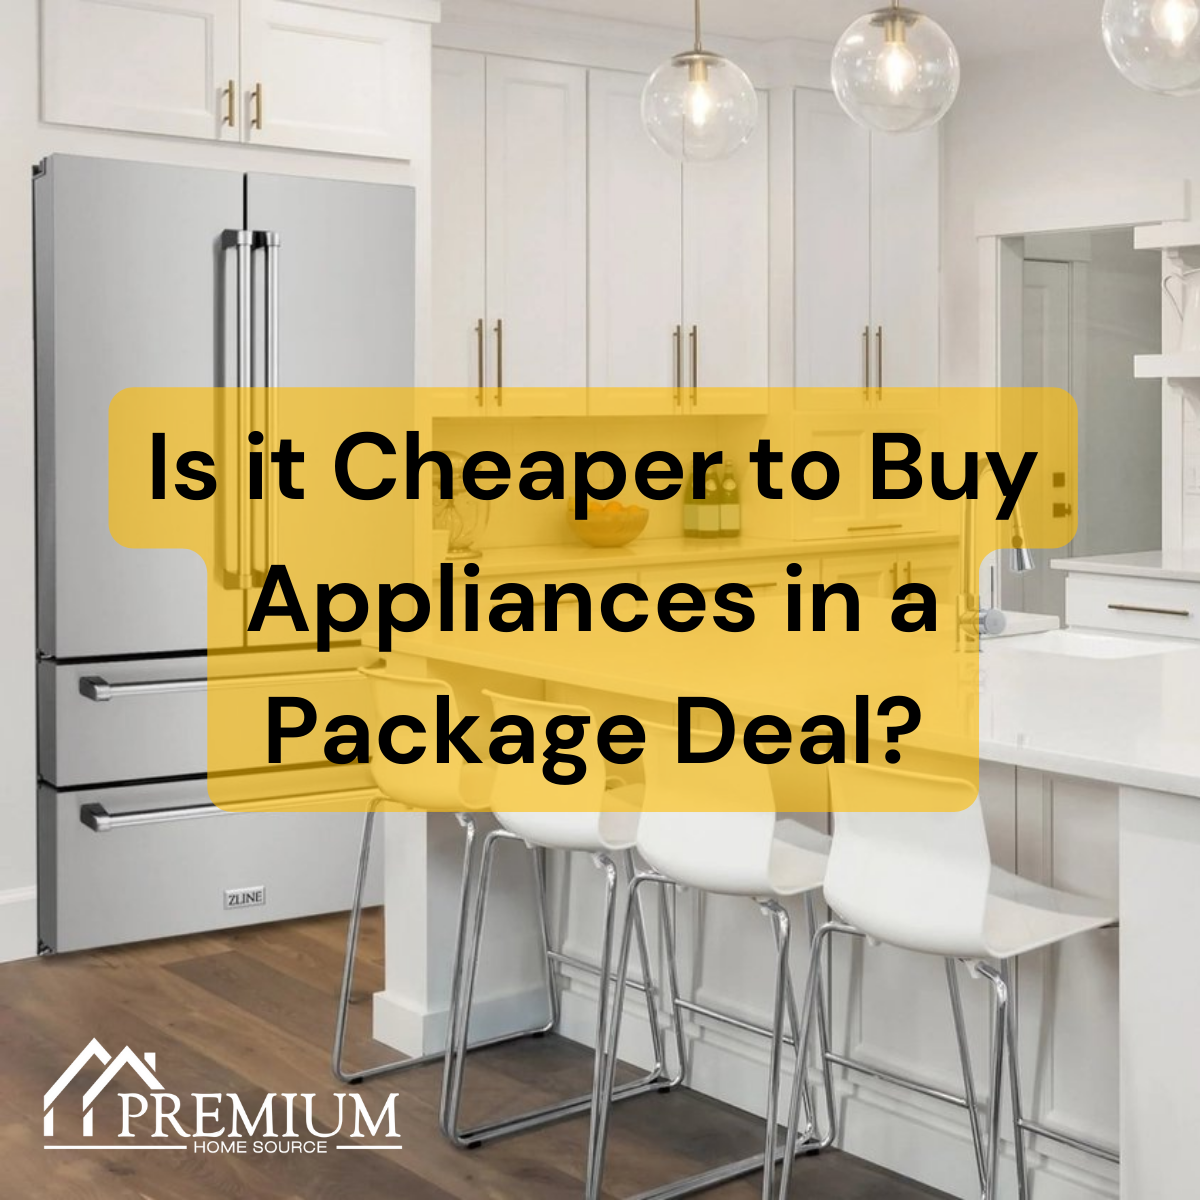 Is it Cheaper to Buy Appliances in a Package Deal?